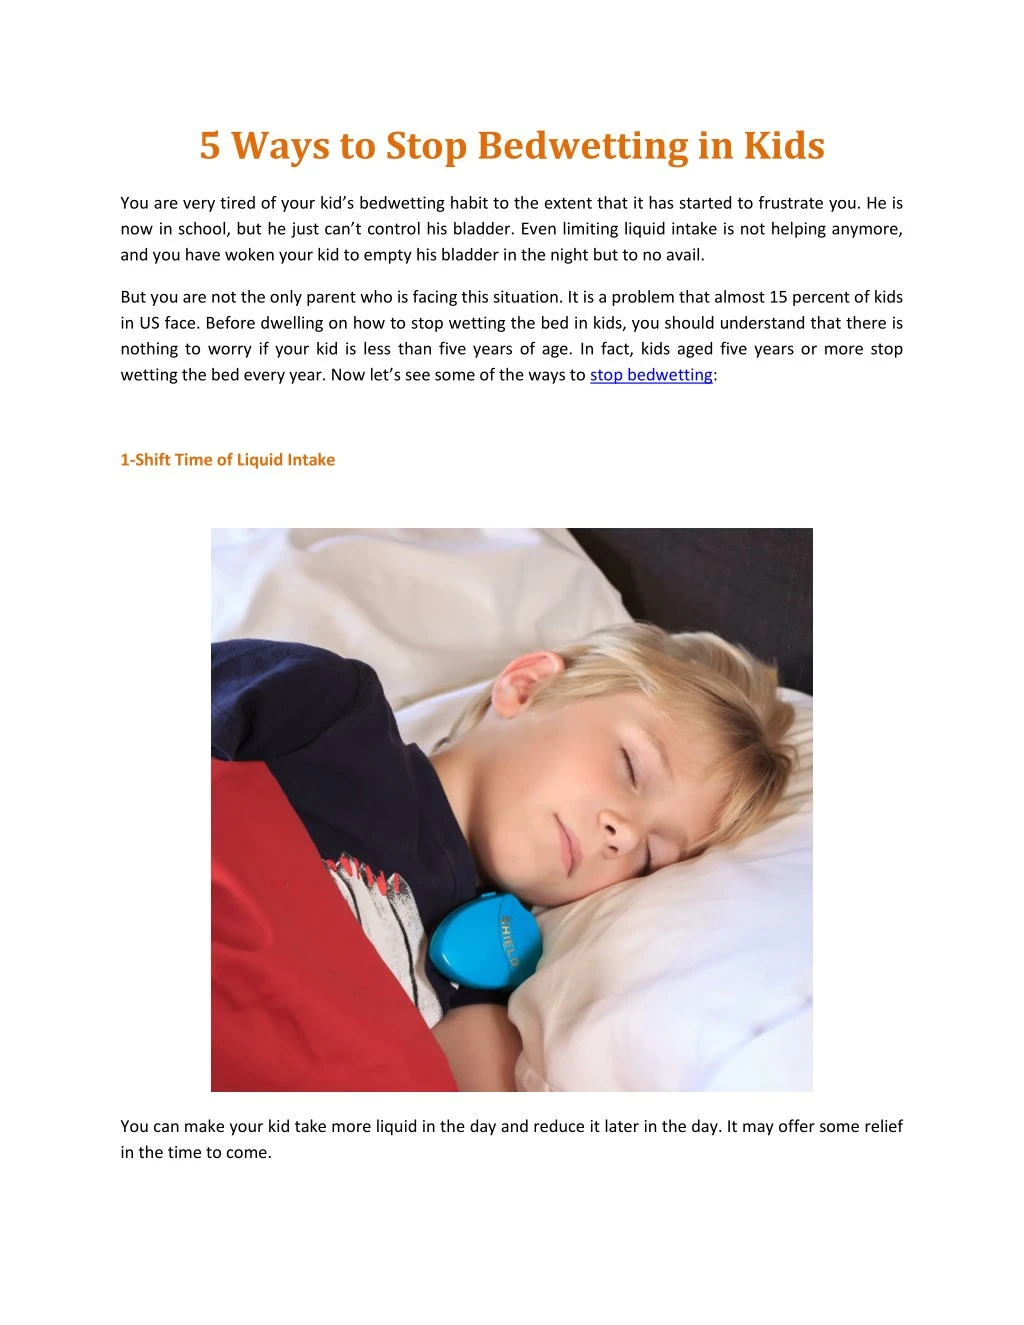 5 ways to stop bedwetting in kids